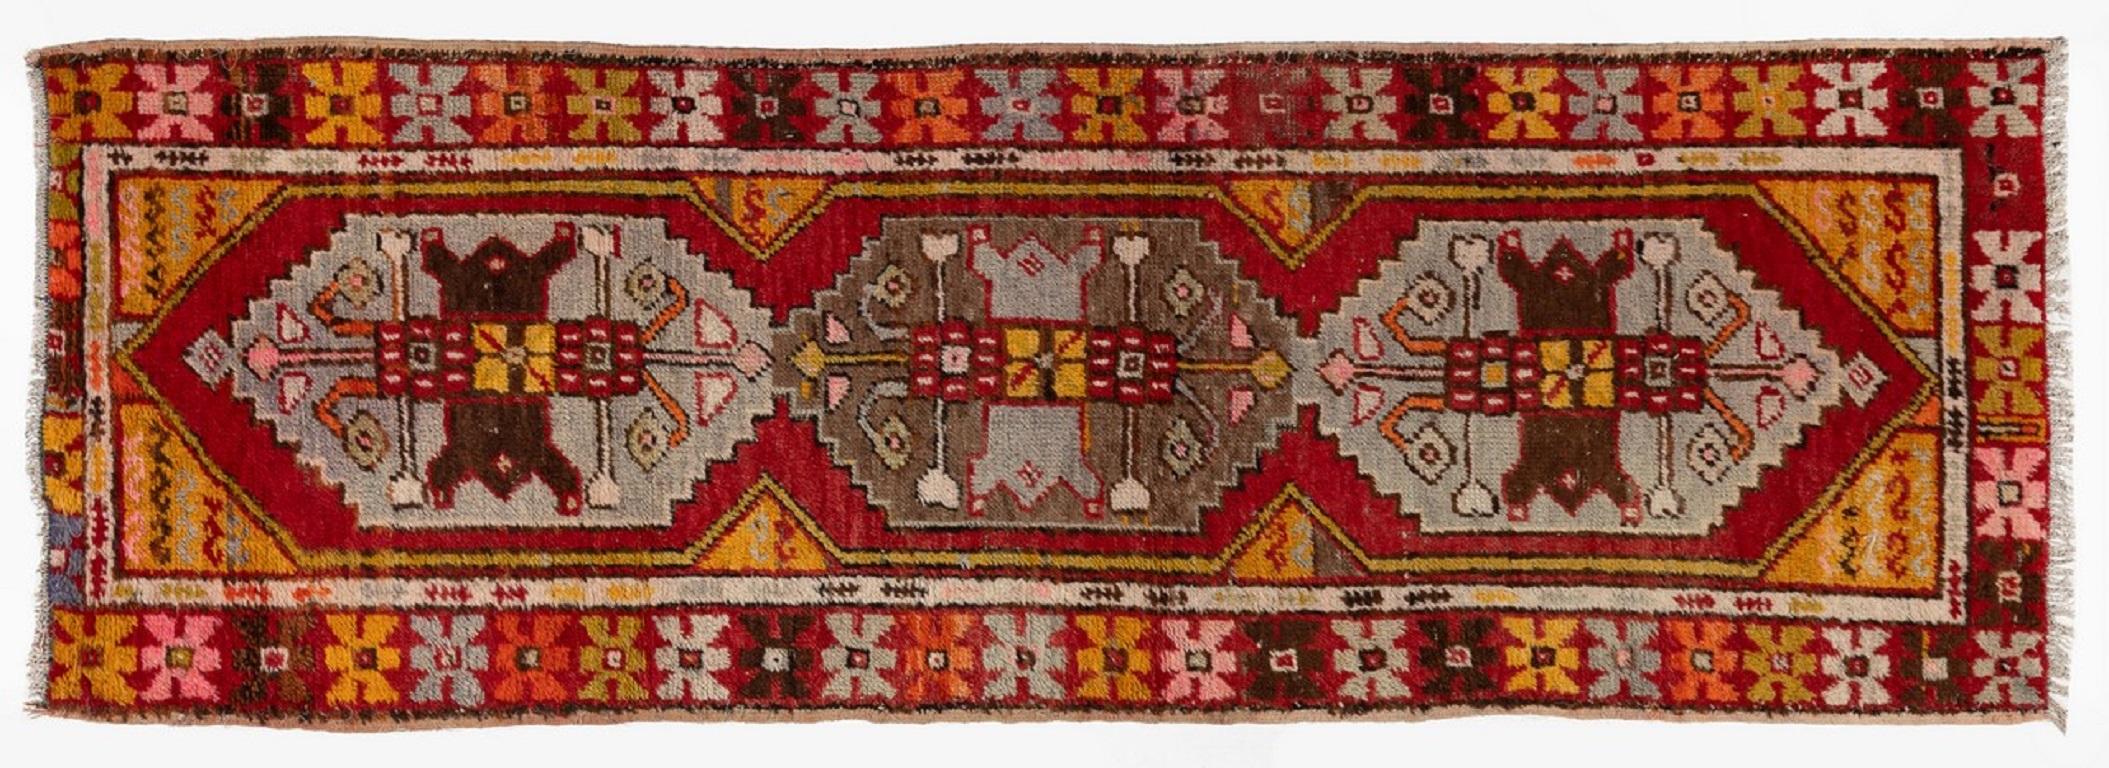 Hand-Knotted 2.7x8.5 Ft Vintage Tribal Turkish Runner Rug in Red. Hand Made Corridor Carpet For Sale